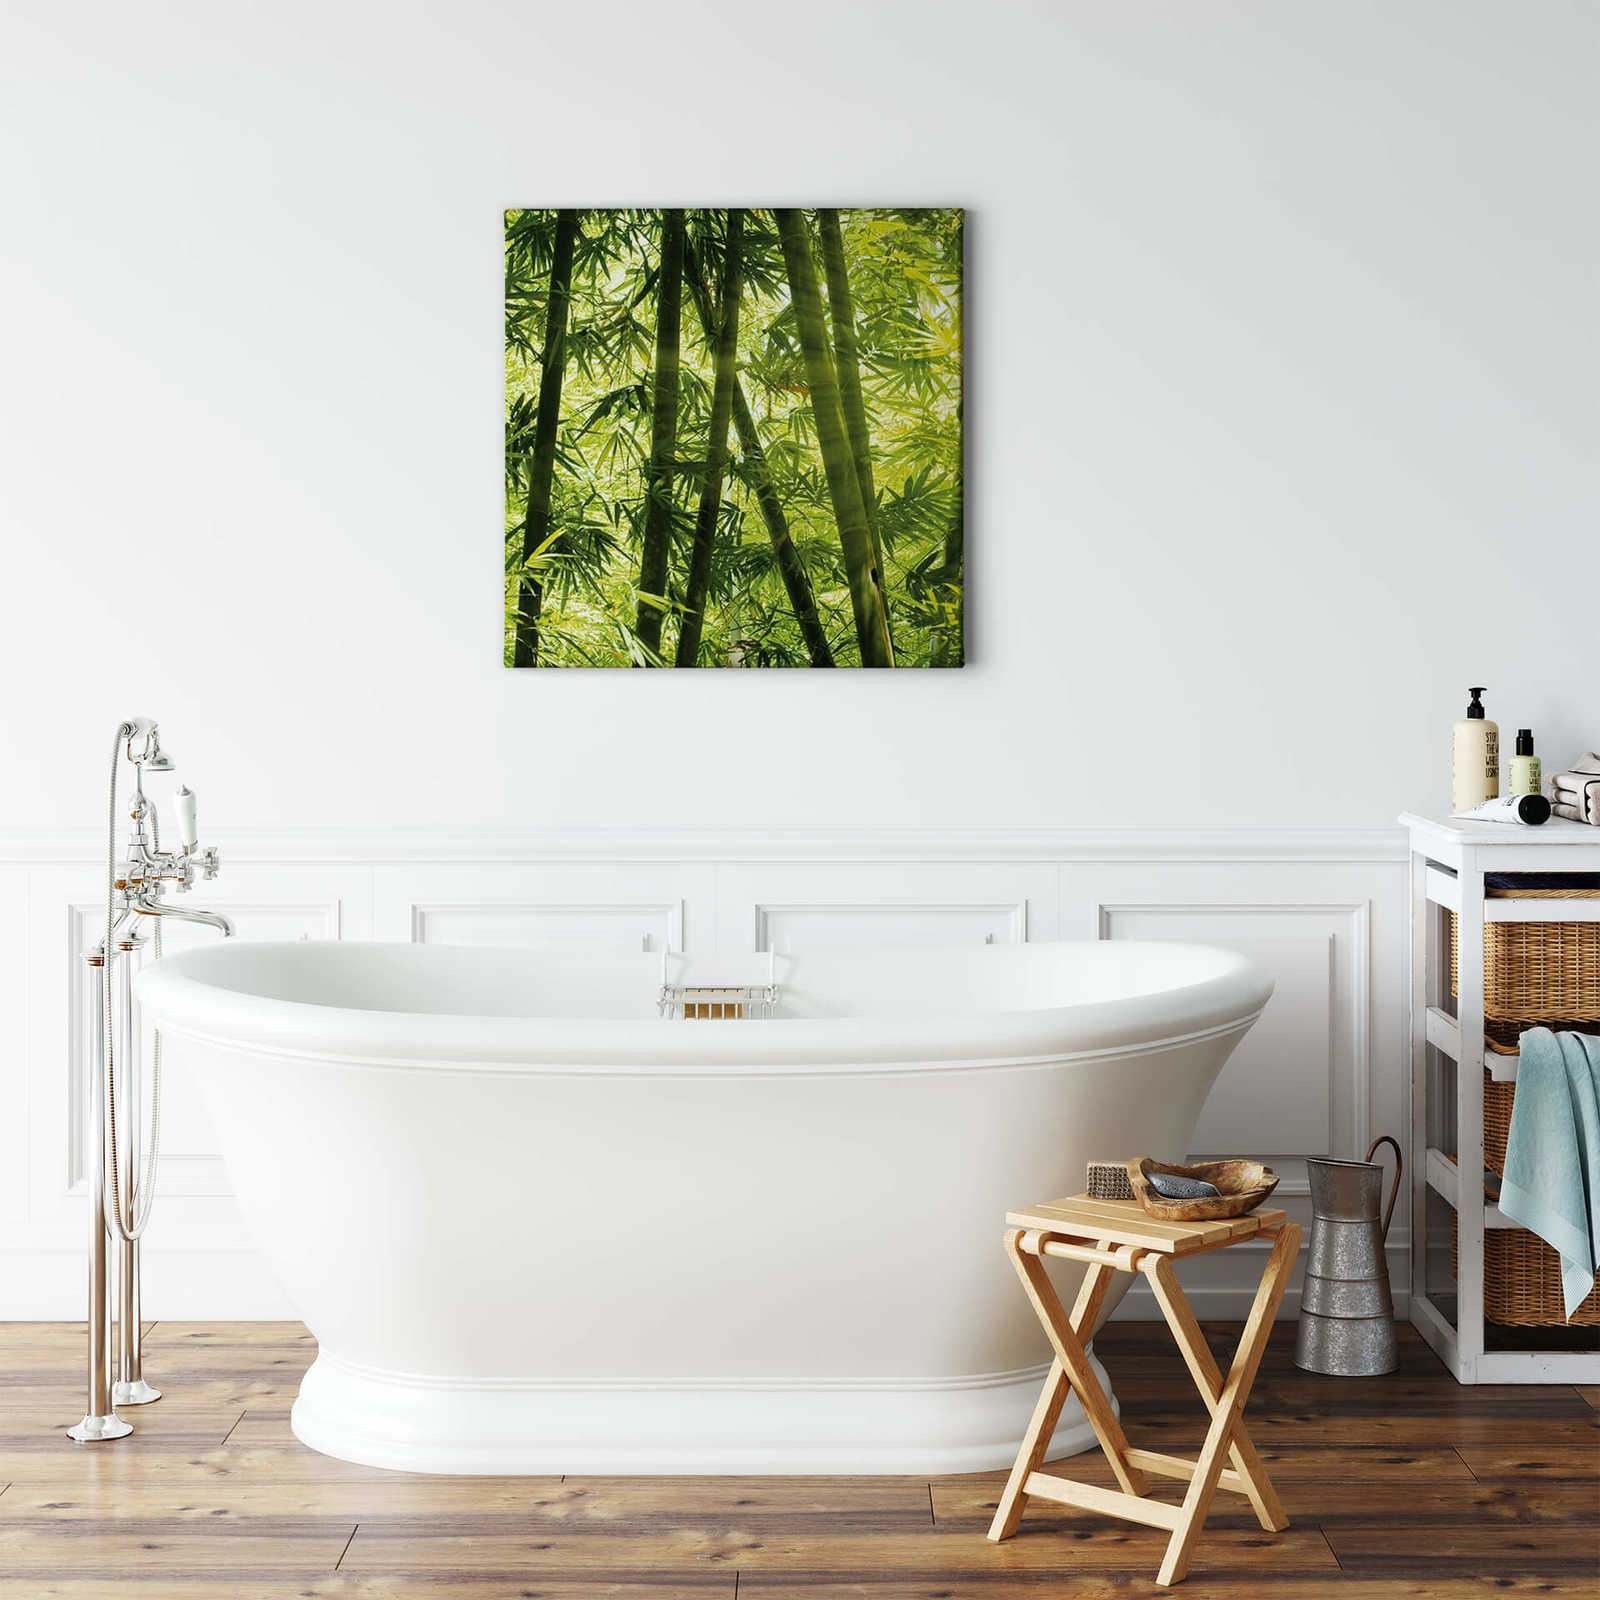             Square canvas print bamboo forest and sunshine
        